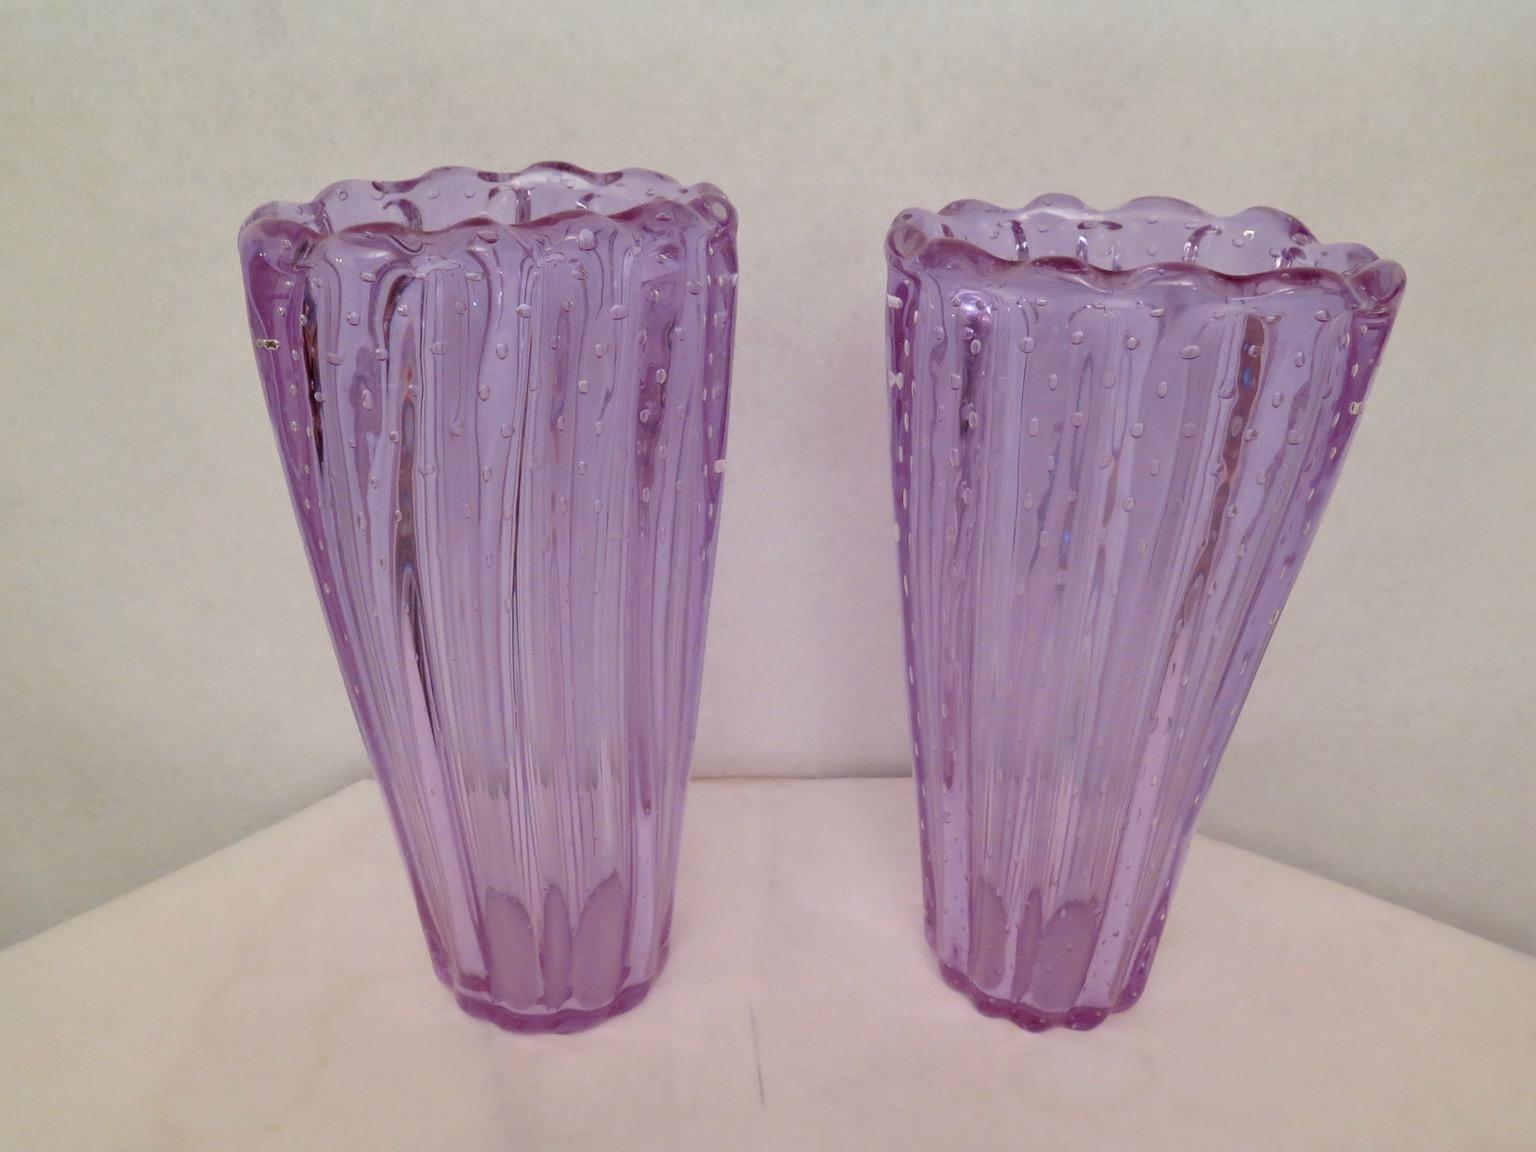 Pairs of Murano midcentury art glass vases, precious both the color and the type of workmanship.

All Murano glass, violet / transparent color. The vases are ribbed, as can be seen from the photos. The part of the base is slightly narrower than